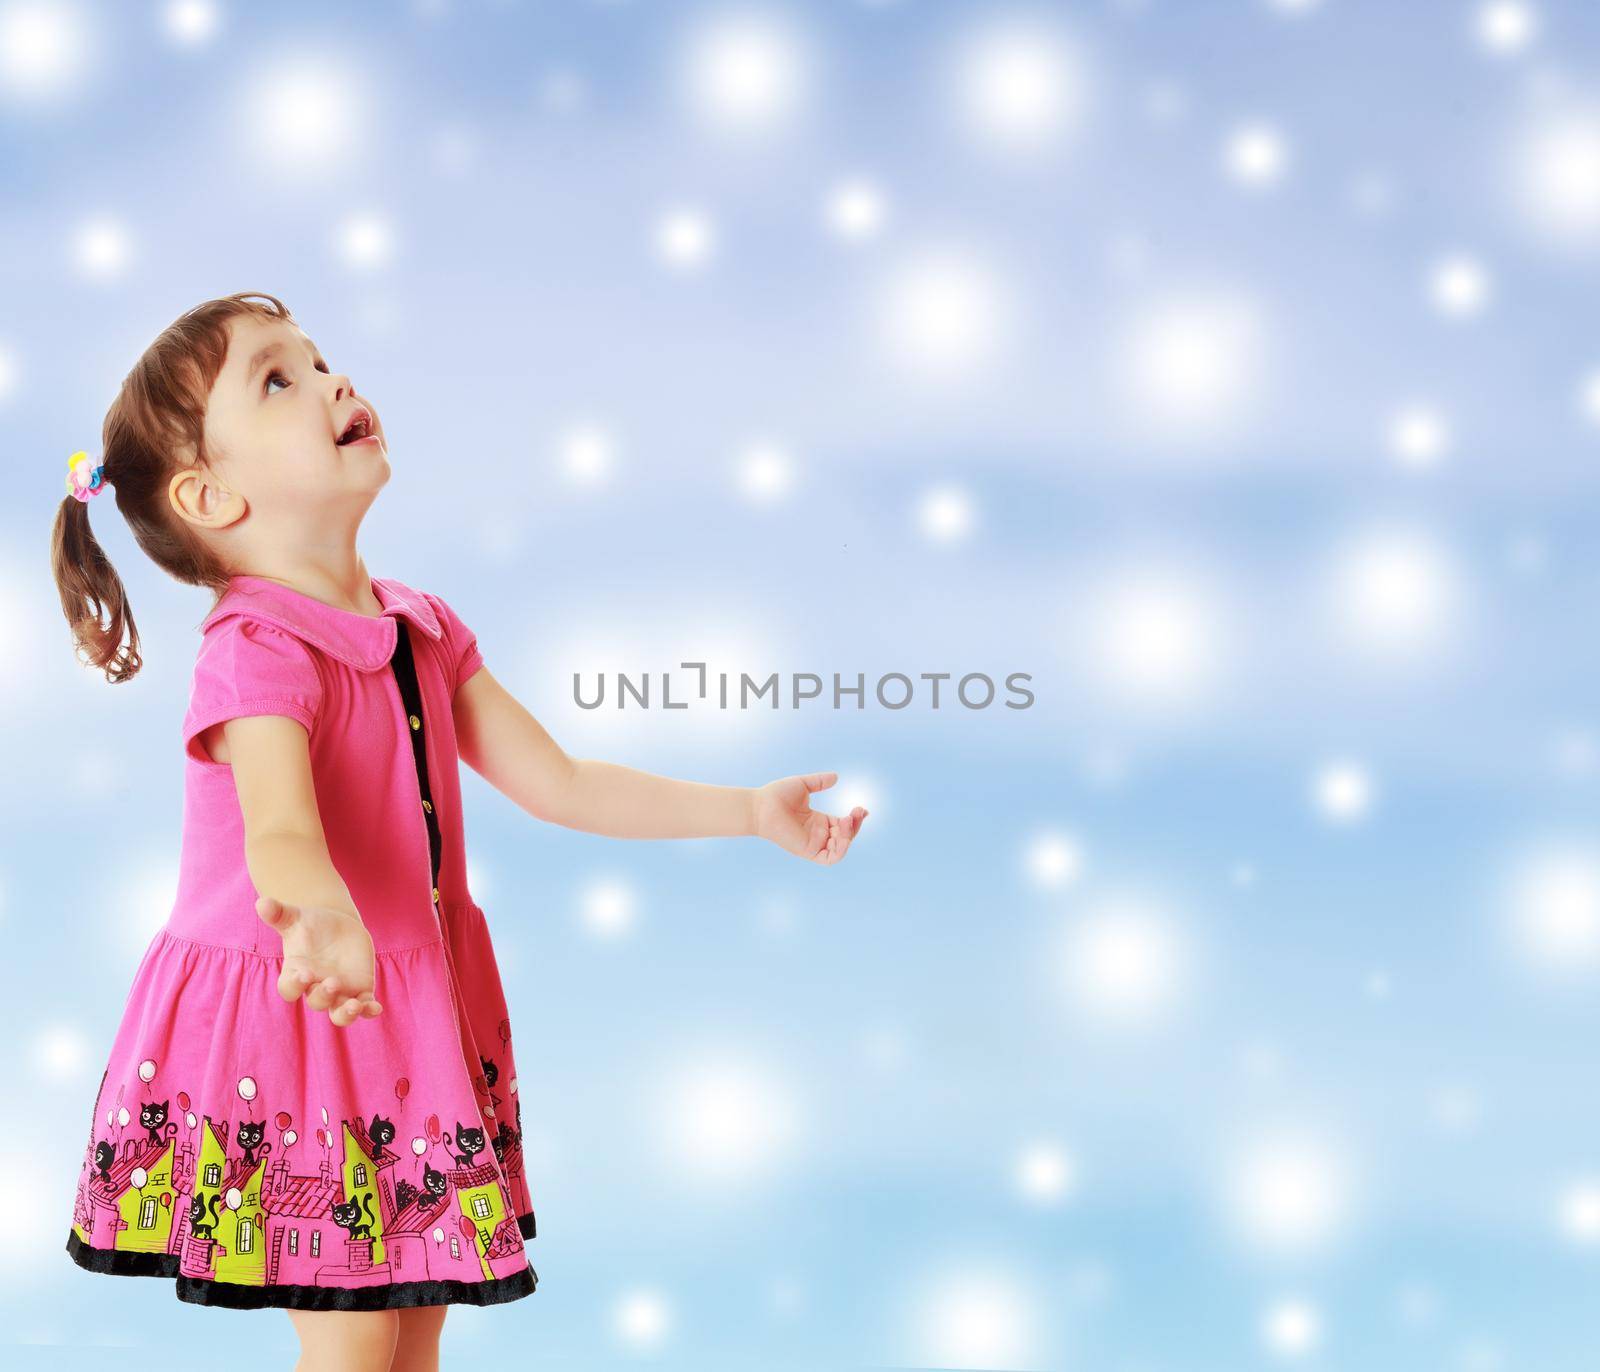 Adorable little girl with pigtails on the head , in a pink dress. The girl was looking at the top turned sideways to the camera.On new year or Christmas blue background with white big stars.